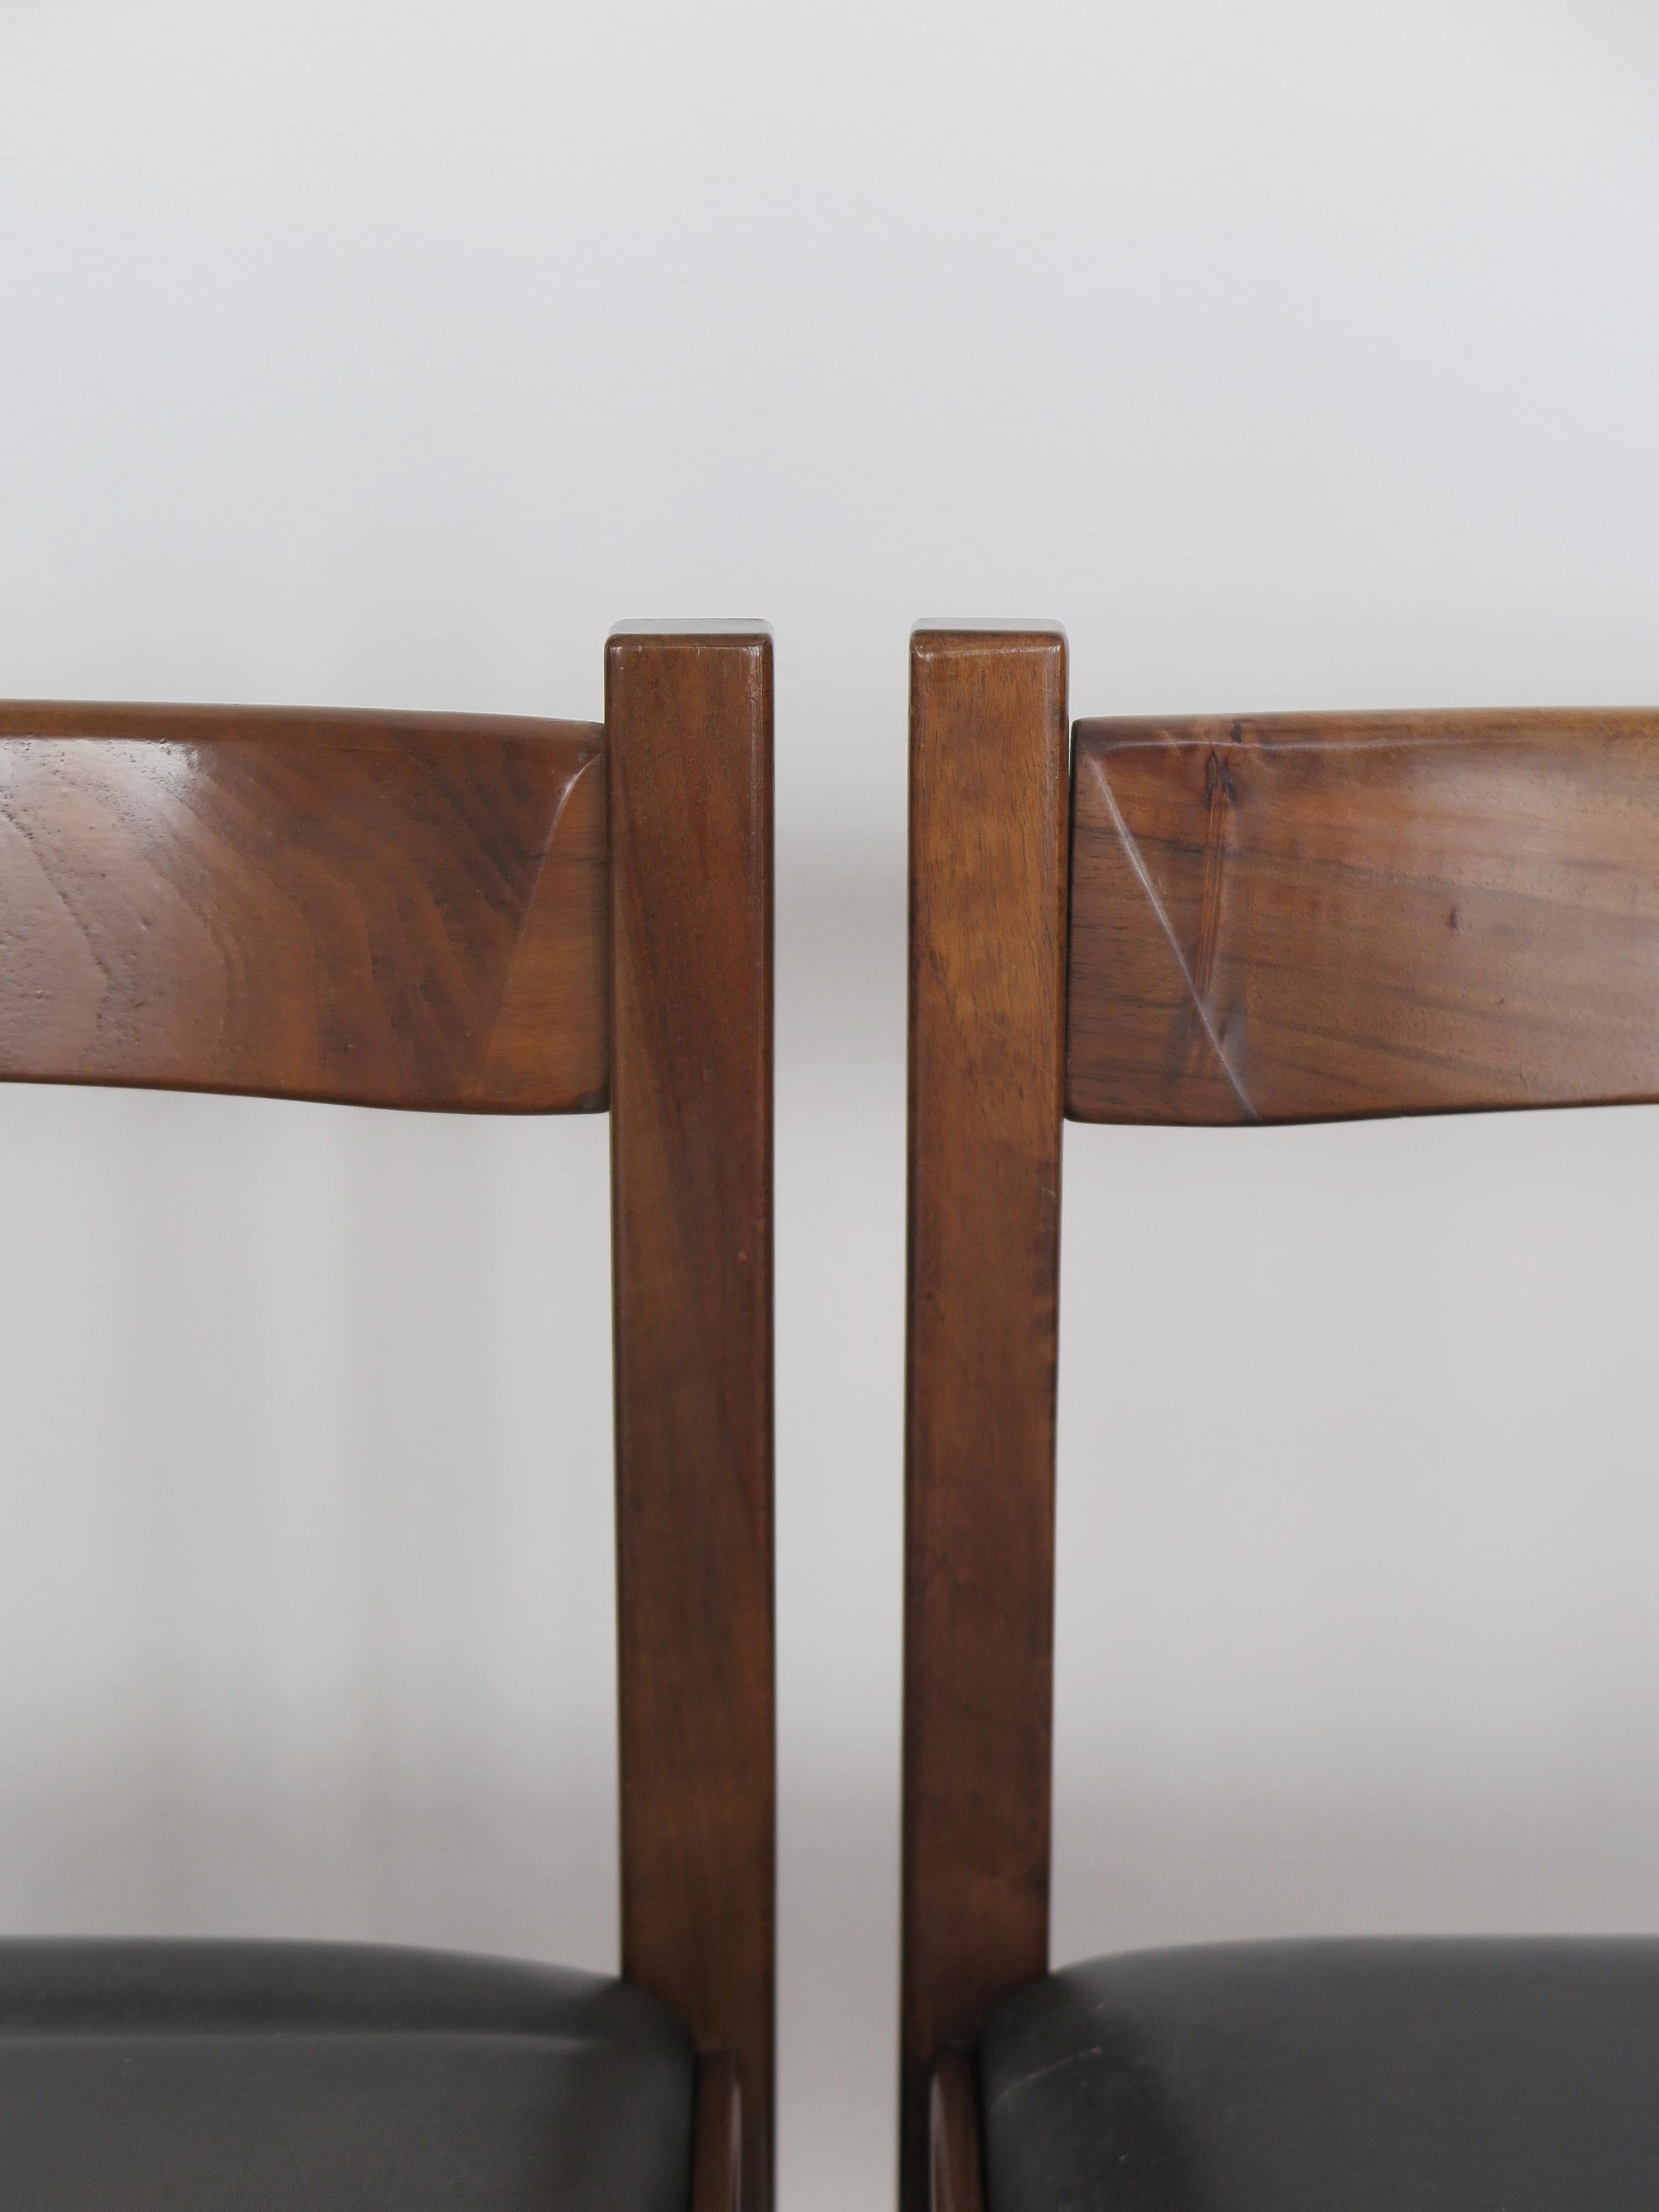 G. Michelucci for Poltronova Italian Midcentury Wood Leather Dining Chairs 1960s For Sale 10